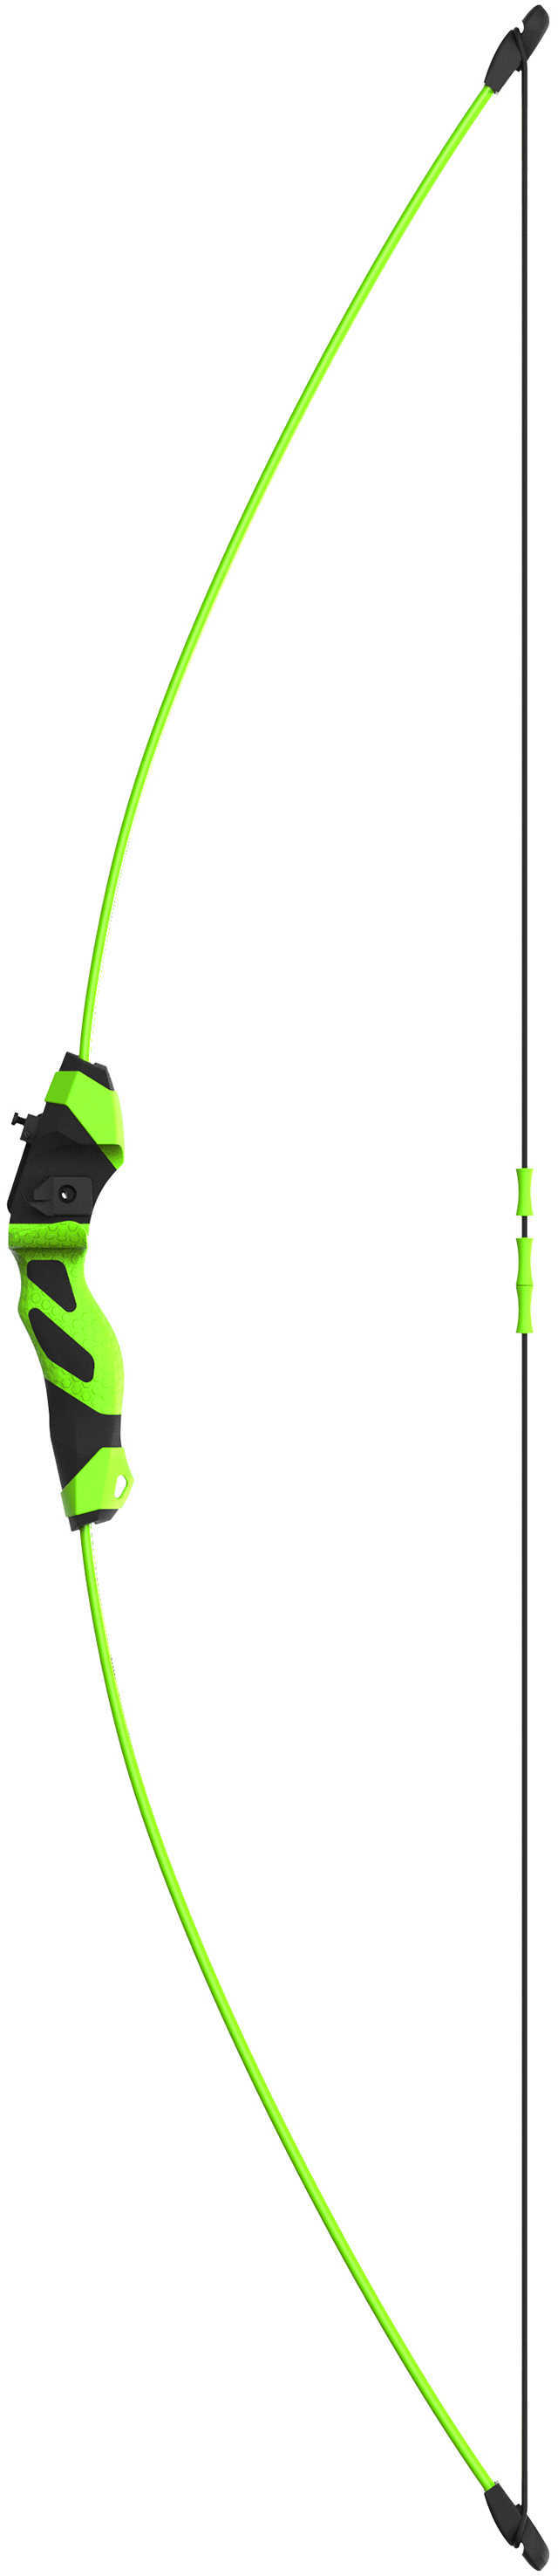 Barnett Youth Archery Quicksilver Compound Bow Neon Green with Black Accents Md: 1276